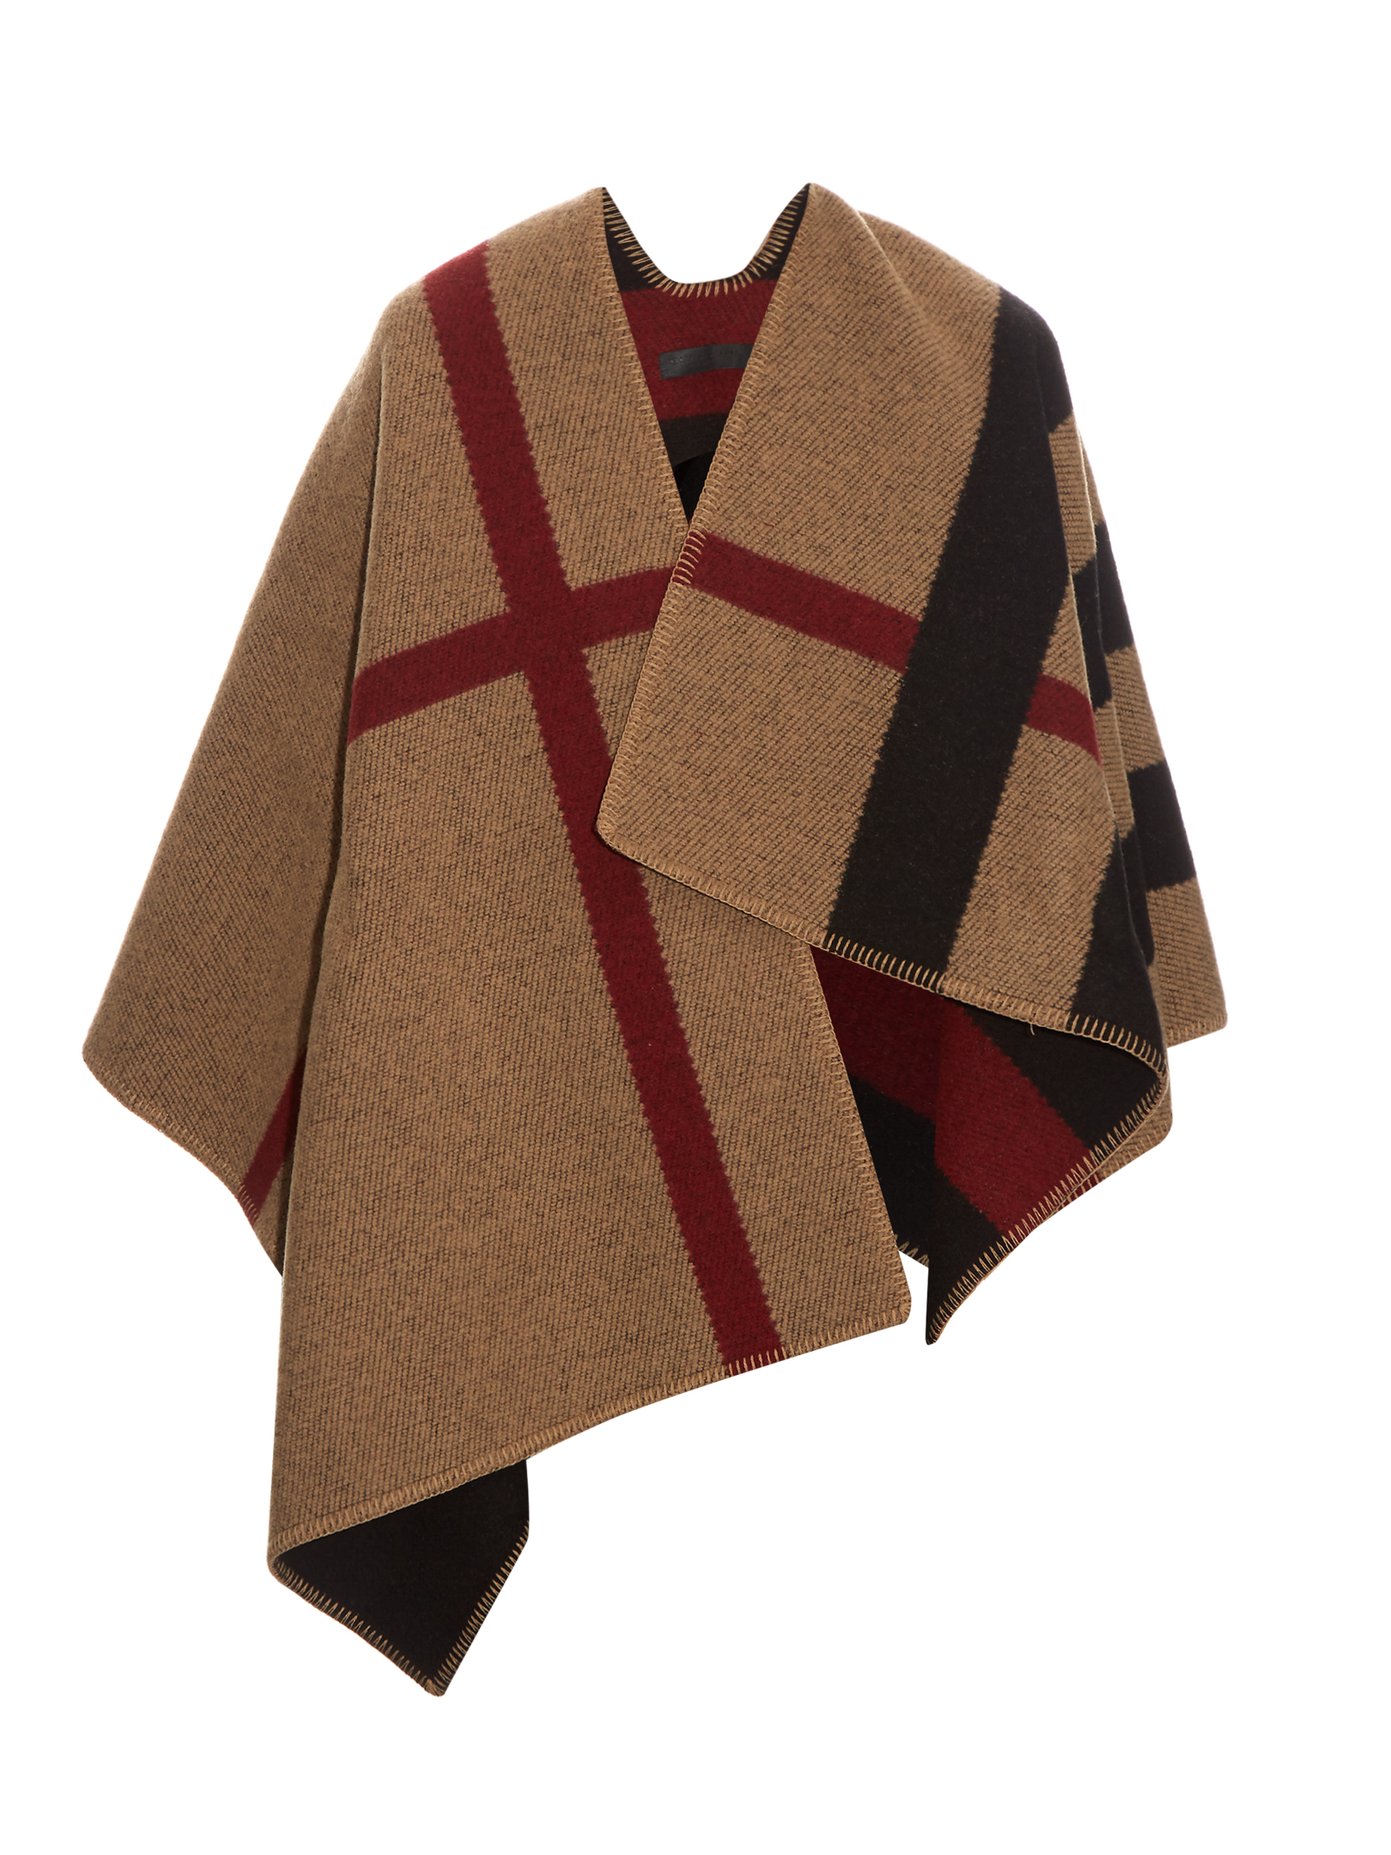 Reversible Checked Wool And Cashmere Blend Cape Burberry Prorsum Matchesfashion Jp